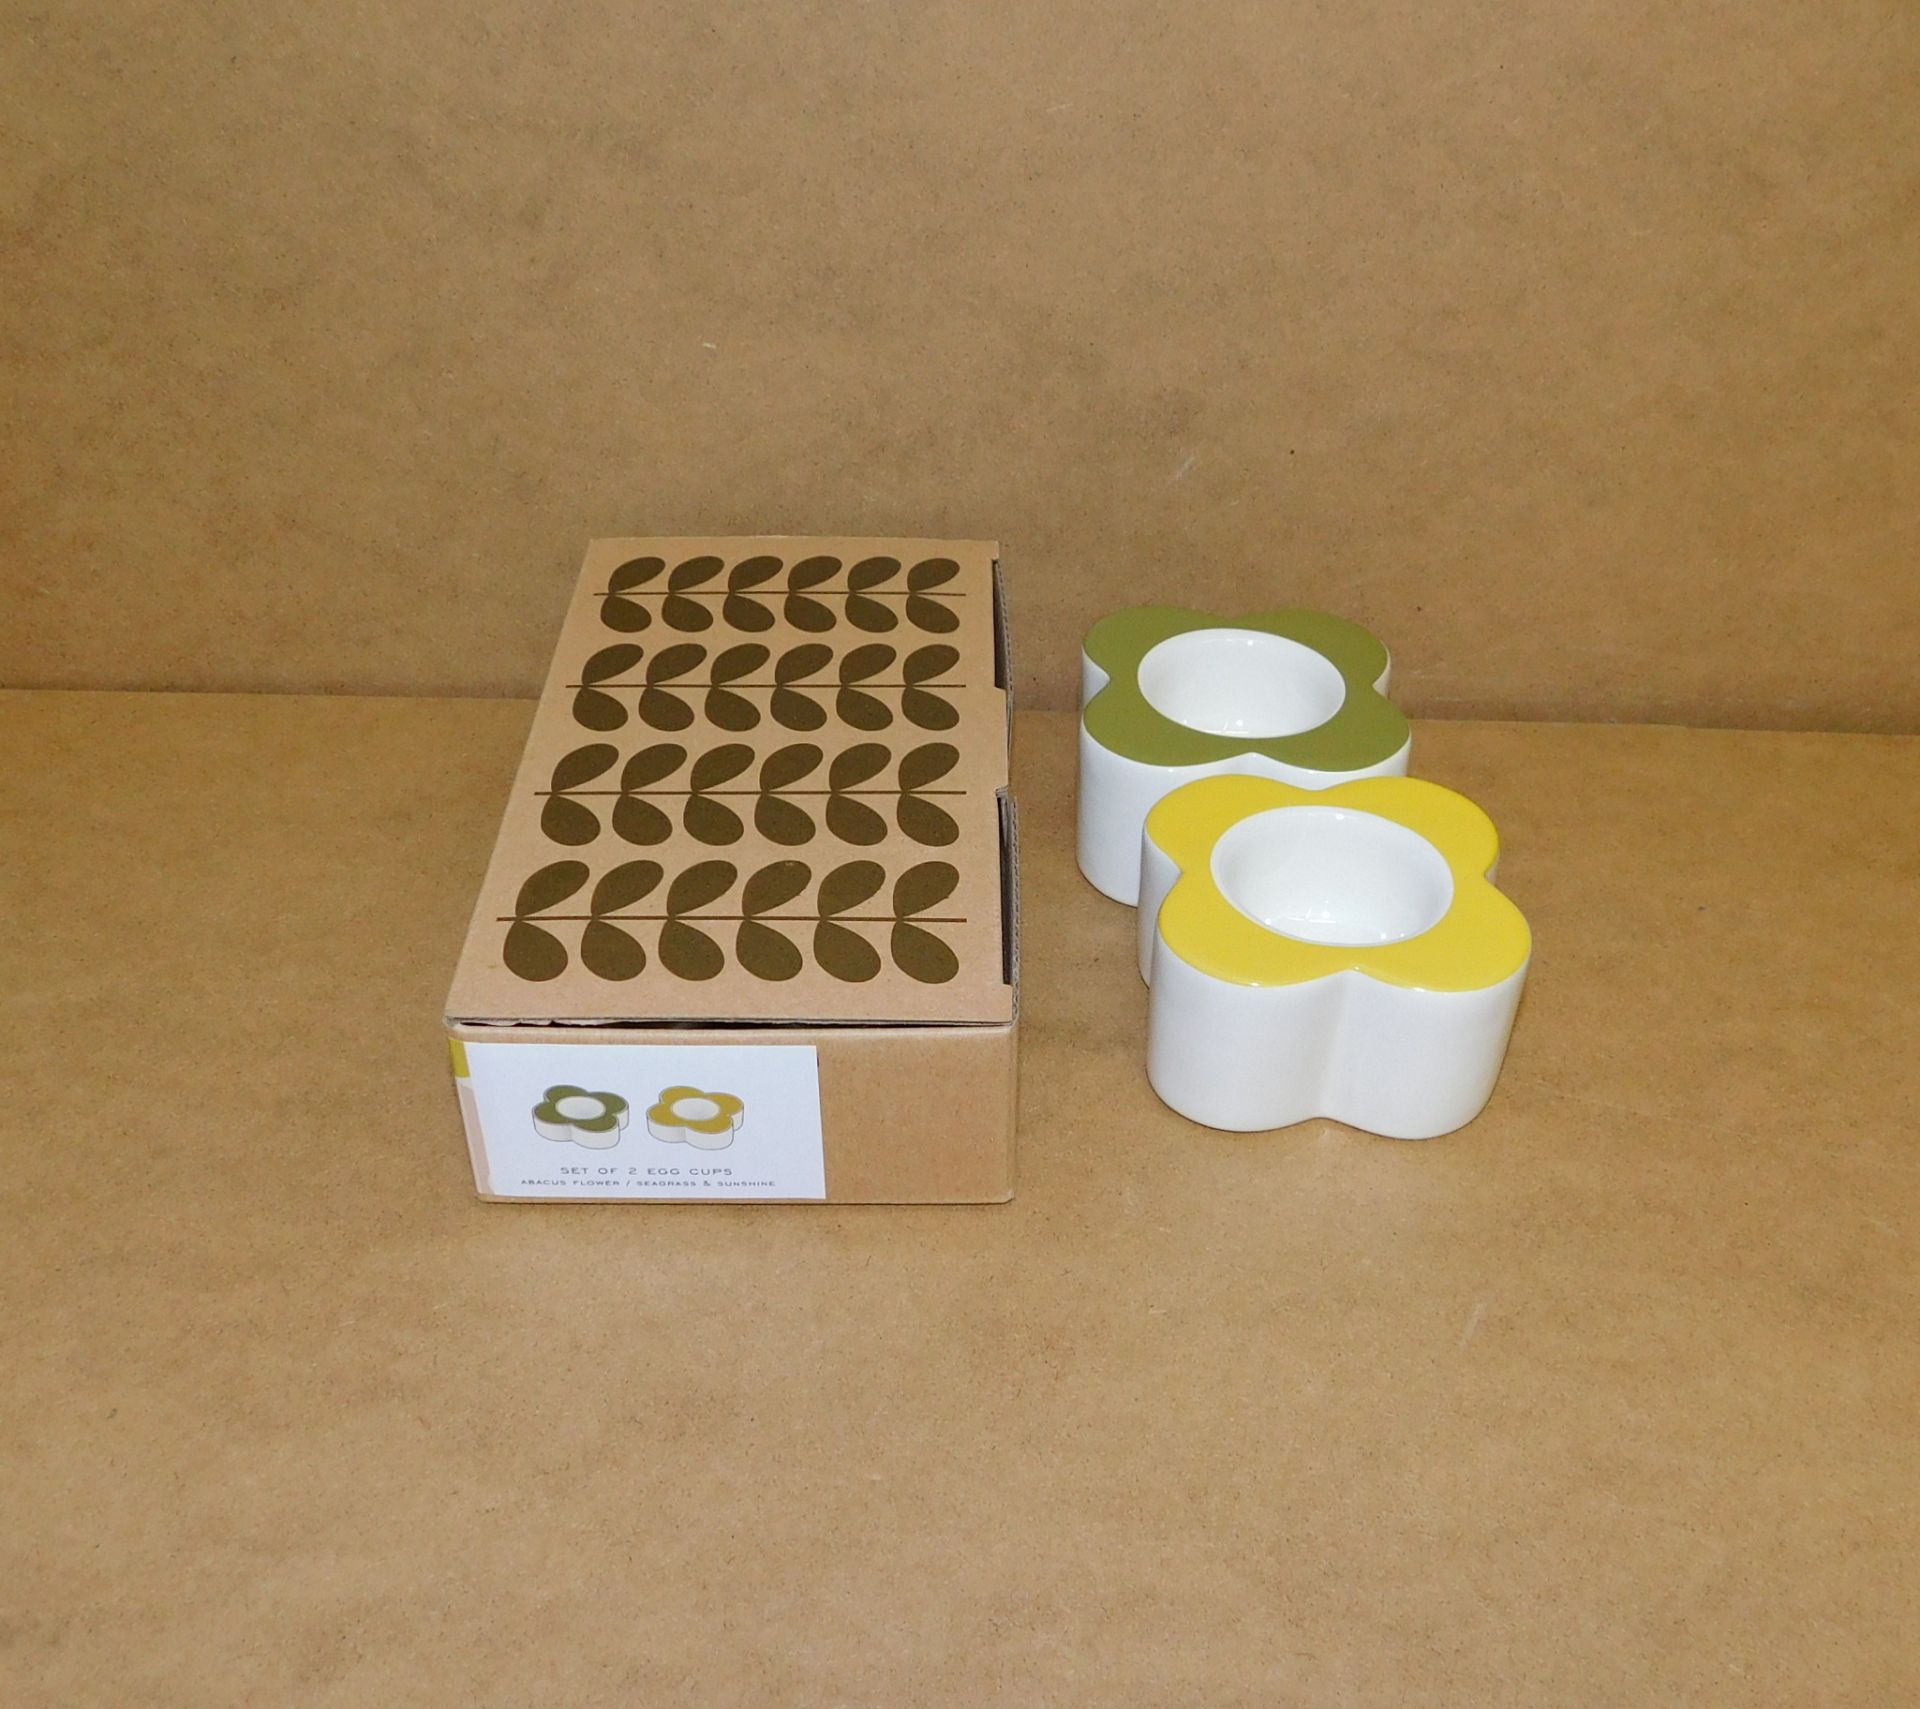 24 Sets of 2 Orla Kiely Egg Cups (£20 per set) (Located Stockport)